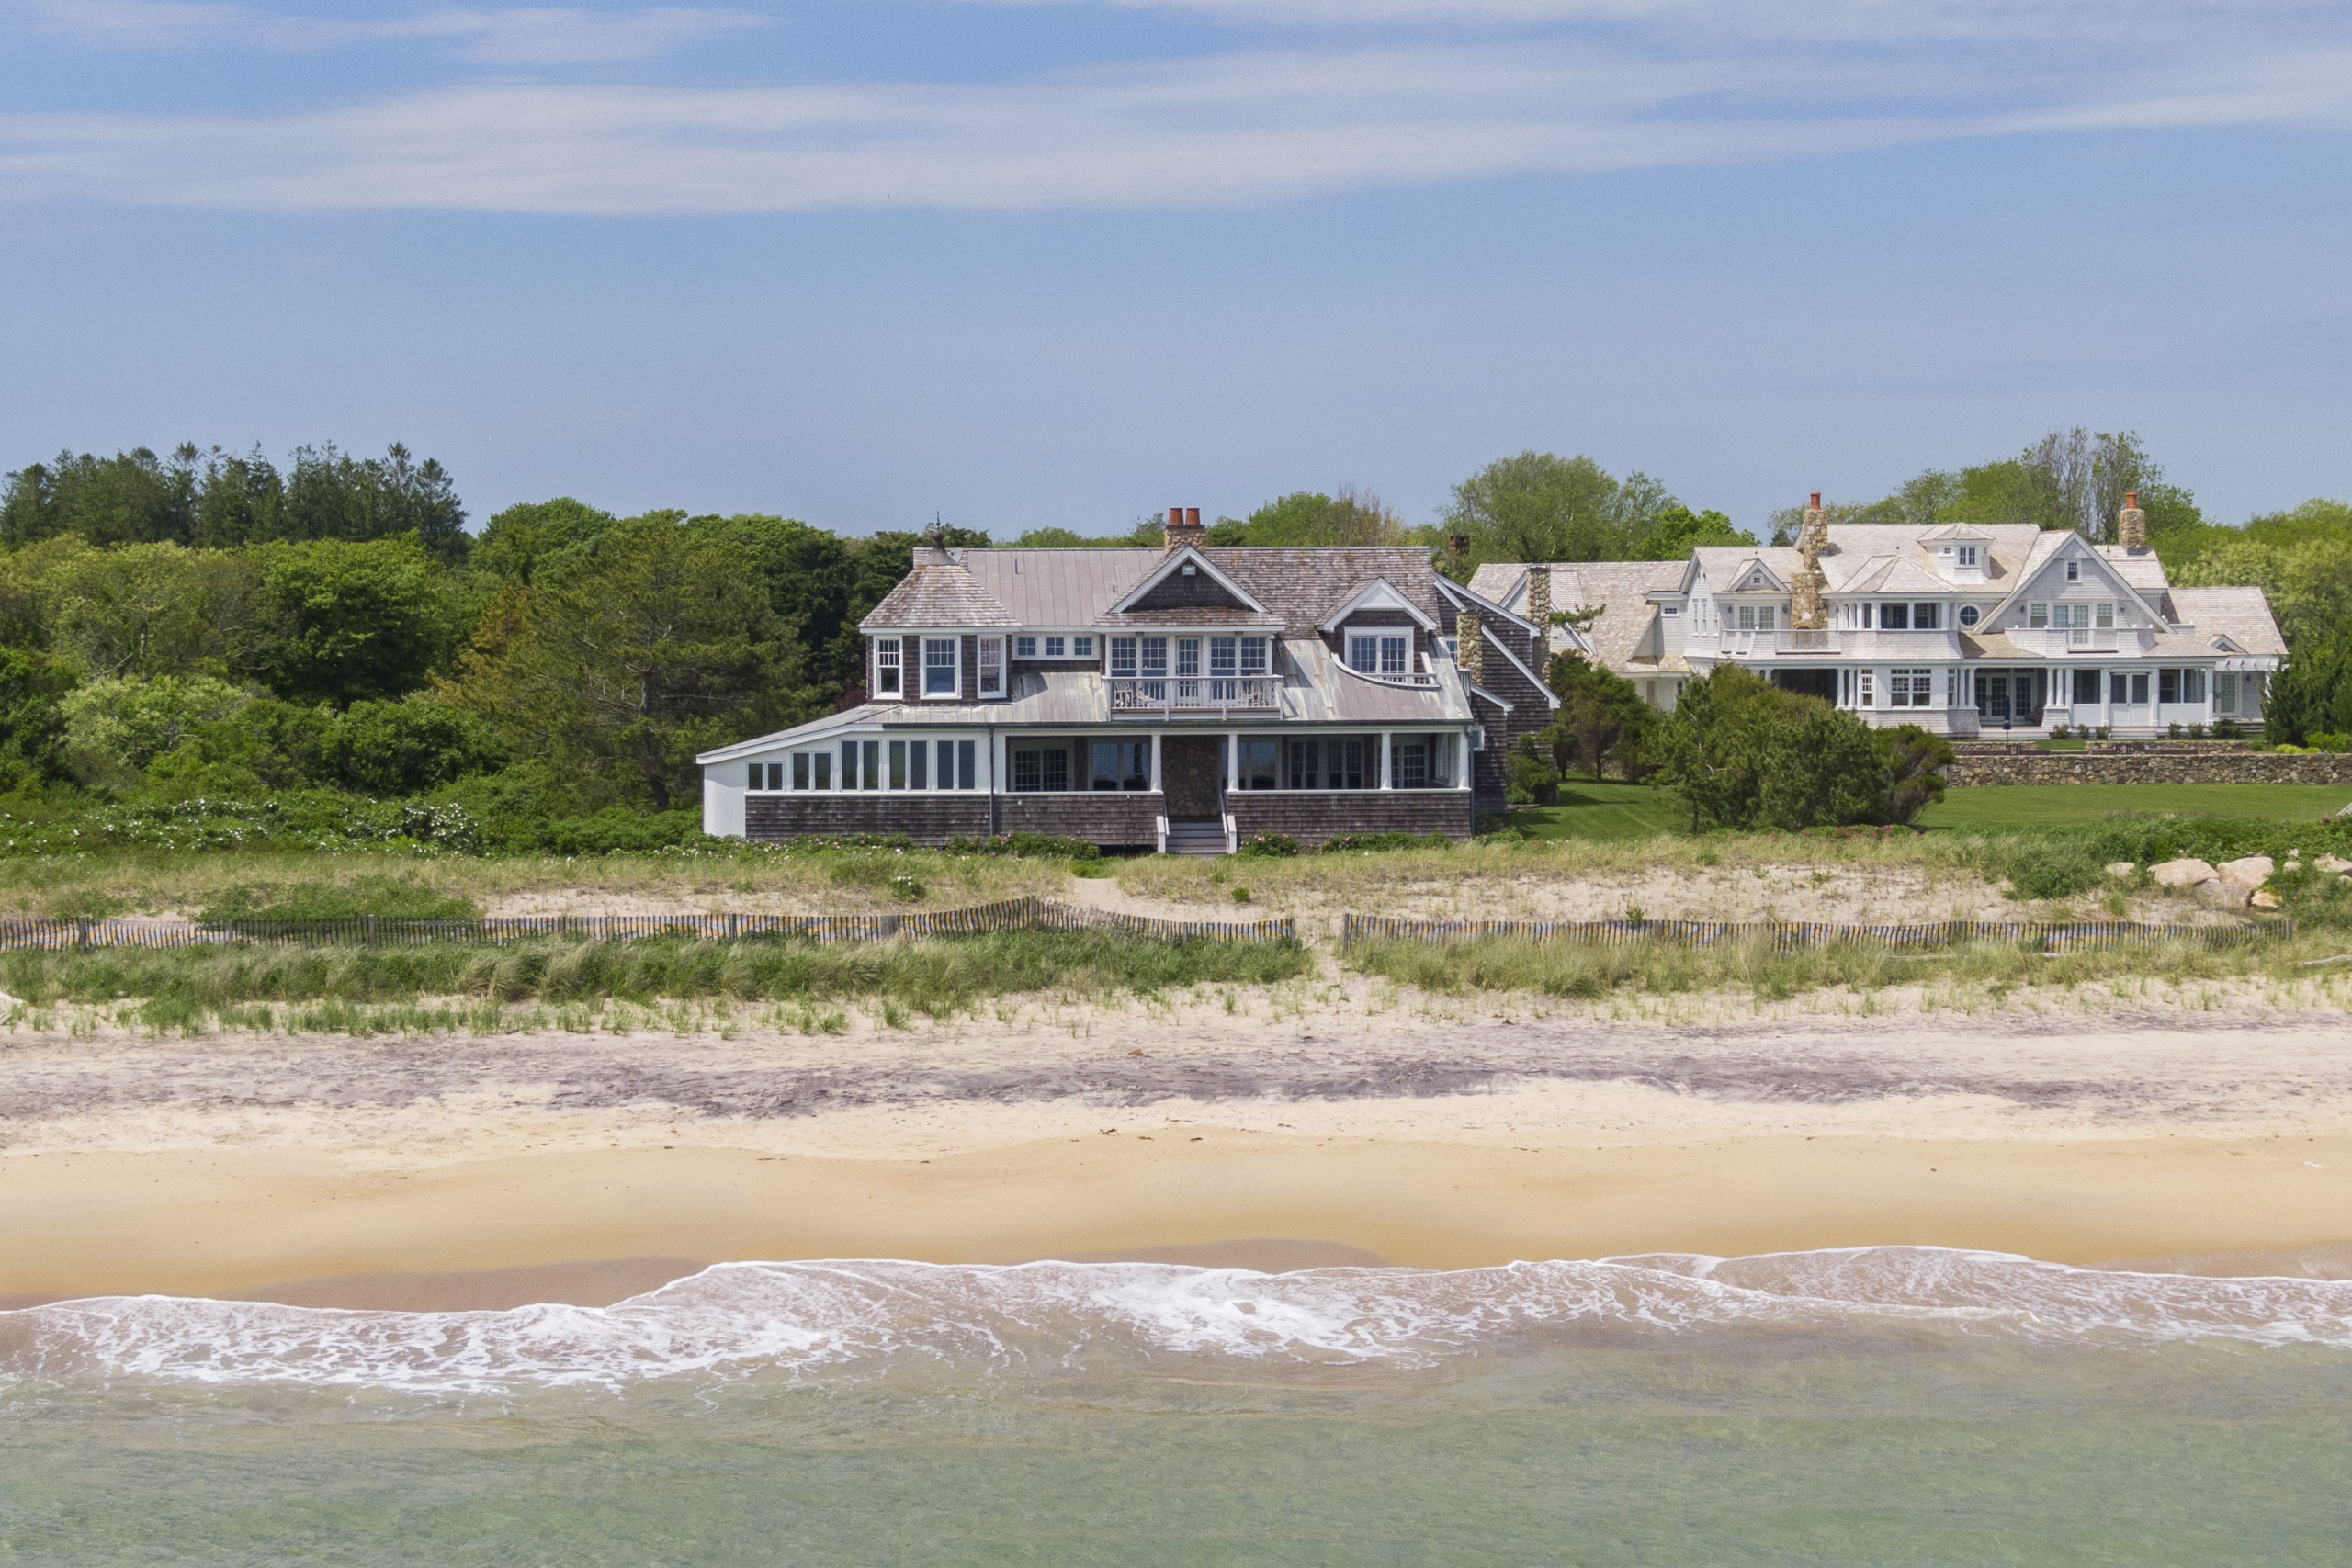 QUONNIE OCEANFRONT HOME SELLS FOR $9,500,000,  MARKING HIGHEST SALE EVER RECORDED IN CHARLESTOWN*